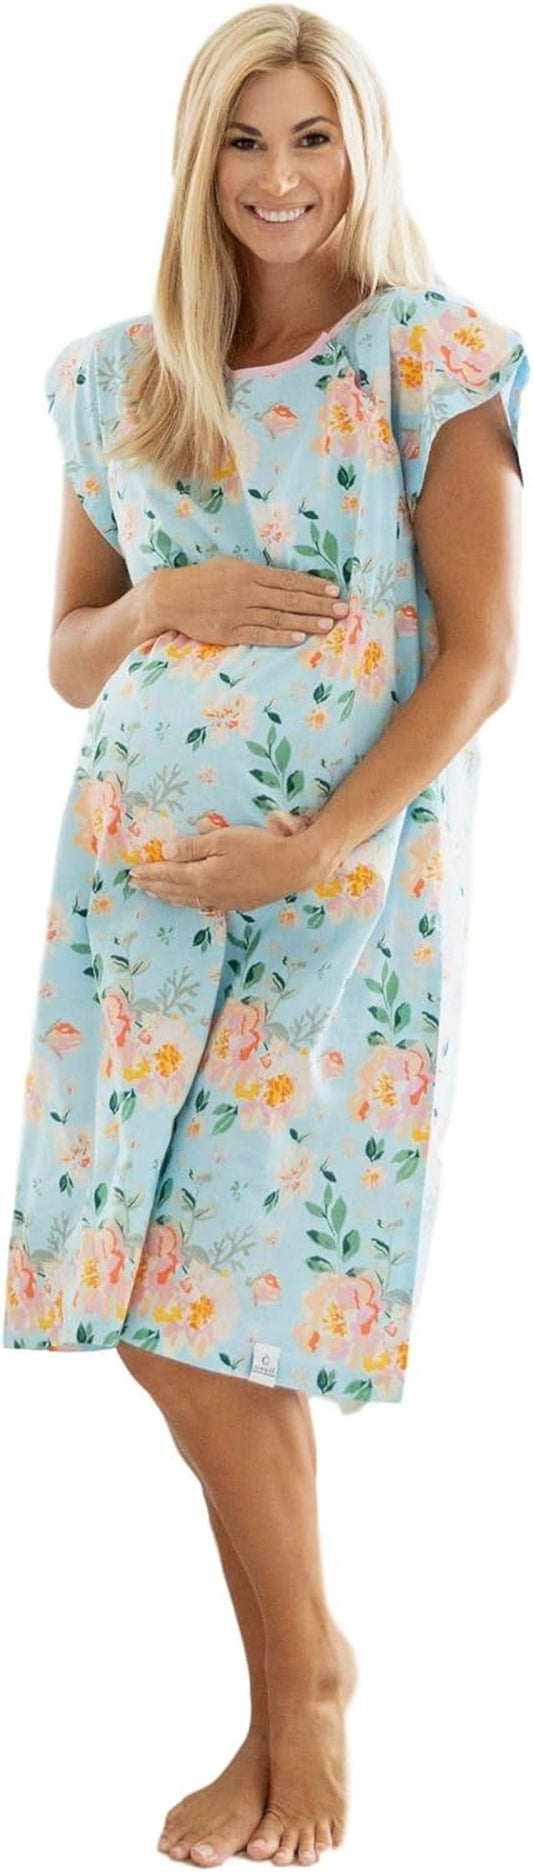 "Luxurious Labor & Delivery Maternity Gown - Essential for Your Hospital Bag (L/XL - Pre Pregnancy 10-16, Jade)"